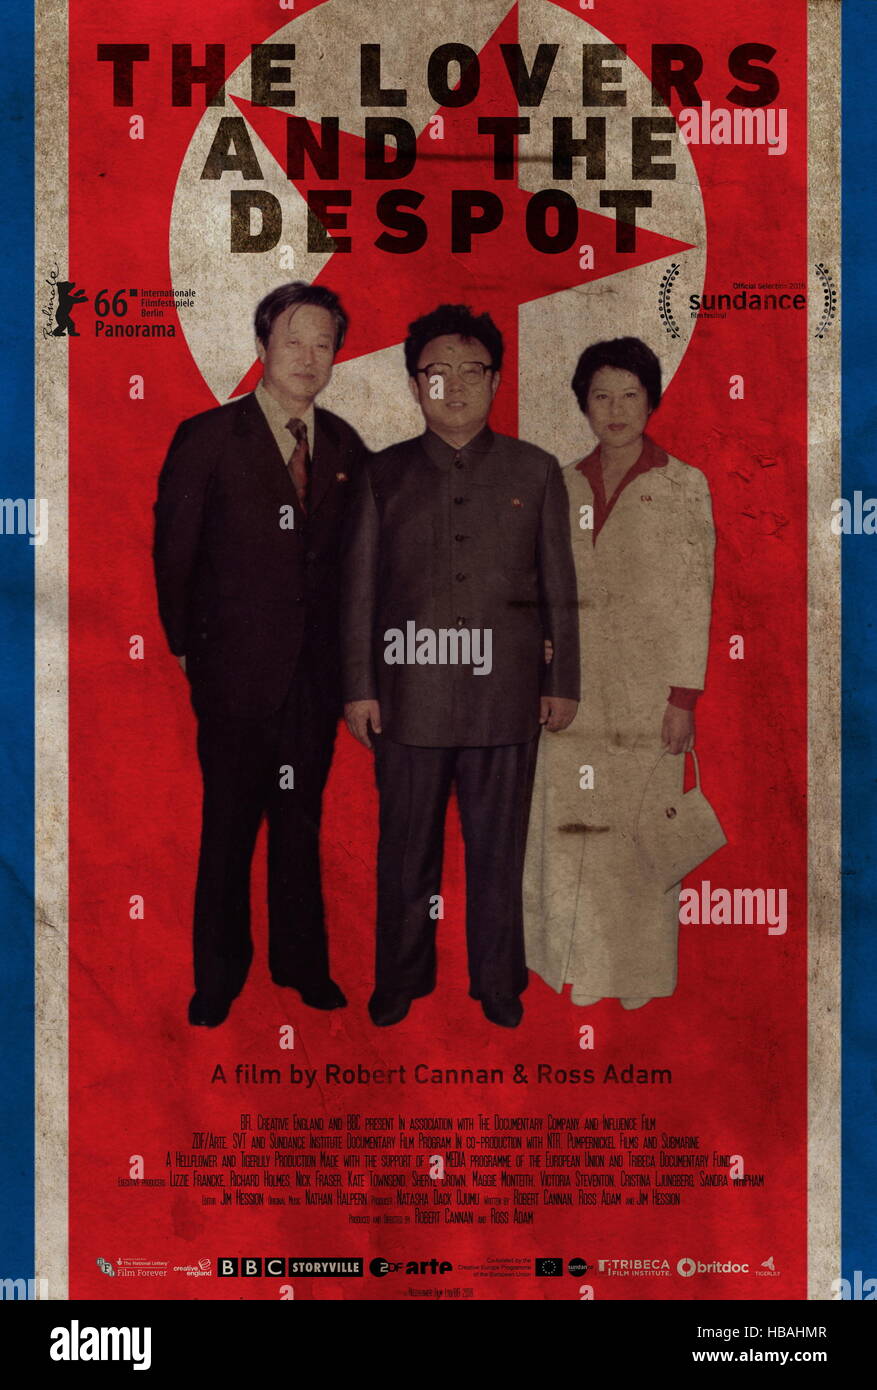 RELEASE DATE: September 23, 2016 TITLE: The Lovers and the Despot STUDIO: DIRECTOR: Ross Adam, Robert Cannan PLOT: The story of the South Korean actor, Choi Eun-hee, and her ex-husband and film director, Shin Sang-ok, who were individually kidnapped and reunited by dictator and film fan Kim Jong-il to force them to develop North Korea's film industry STARRING: Paul Courtenay Hyu (Credit: c Magnolia Pictures/Entertainment Pictures/) Stock Photo